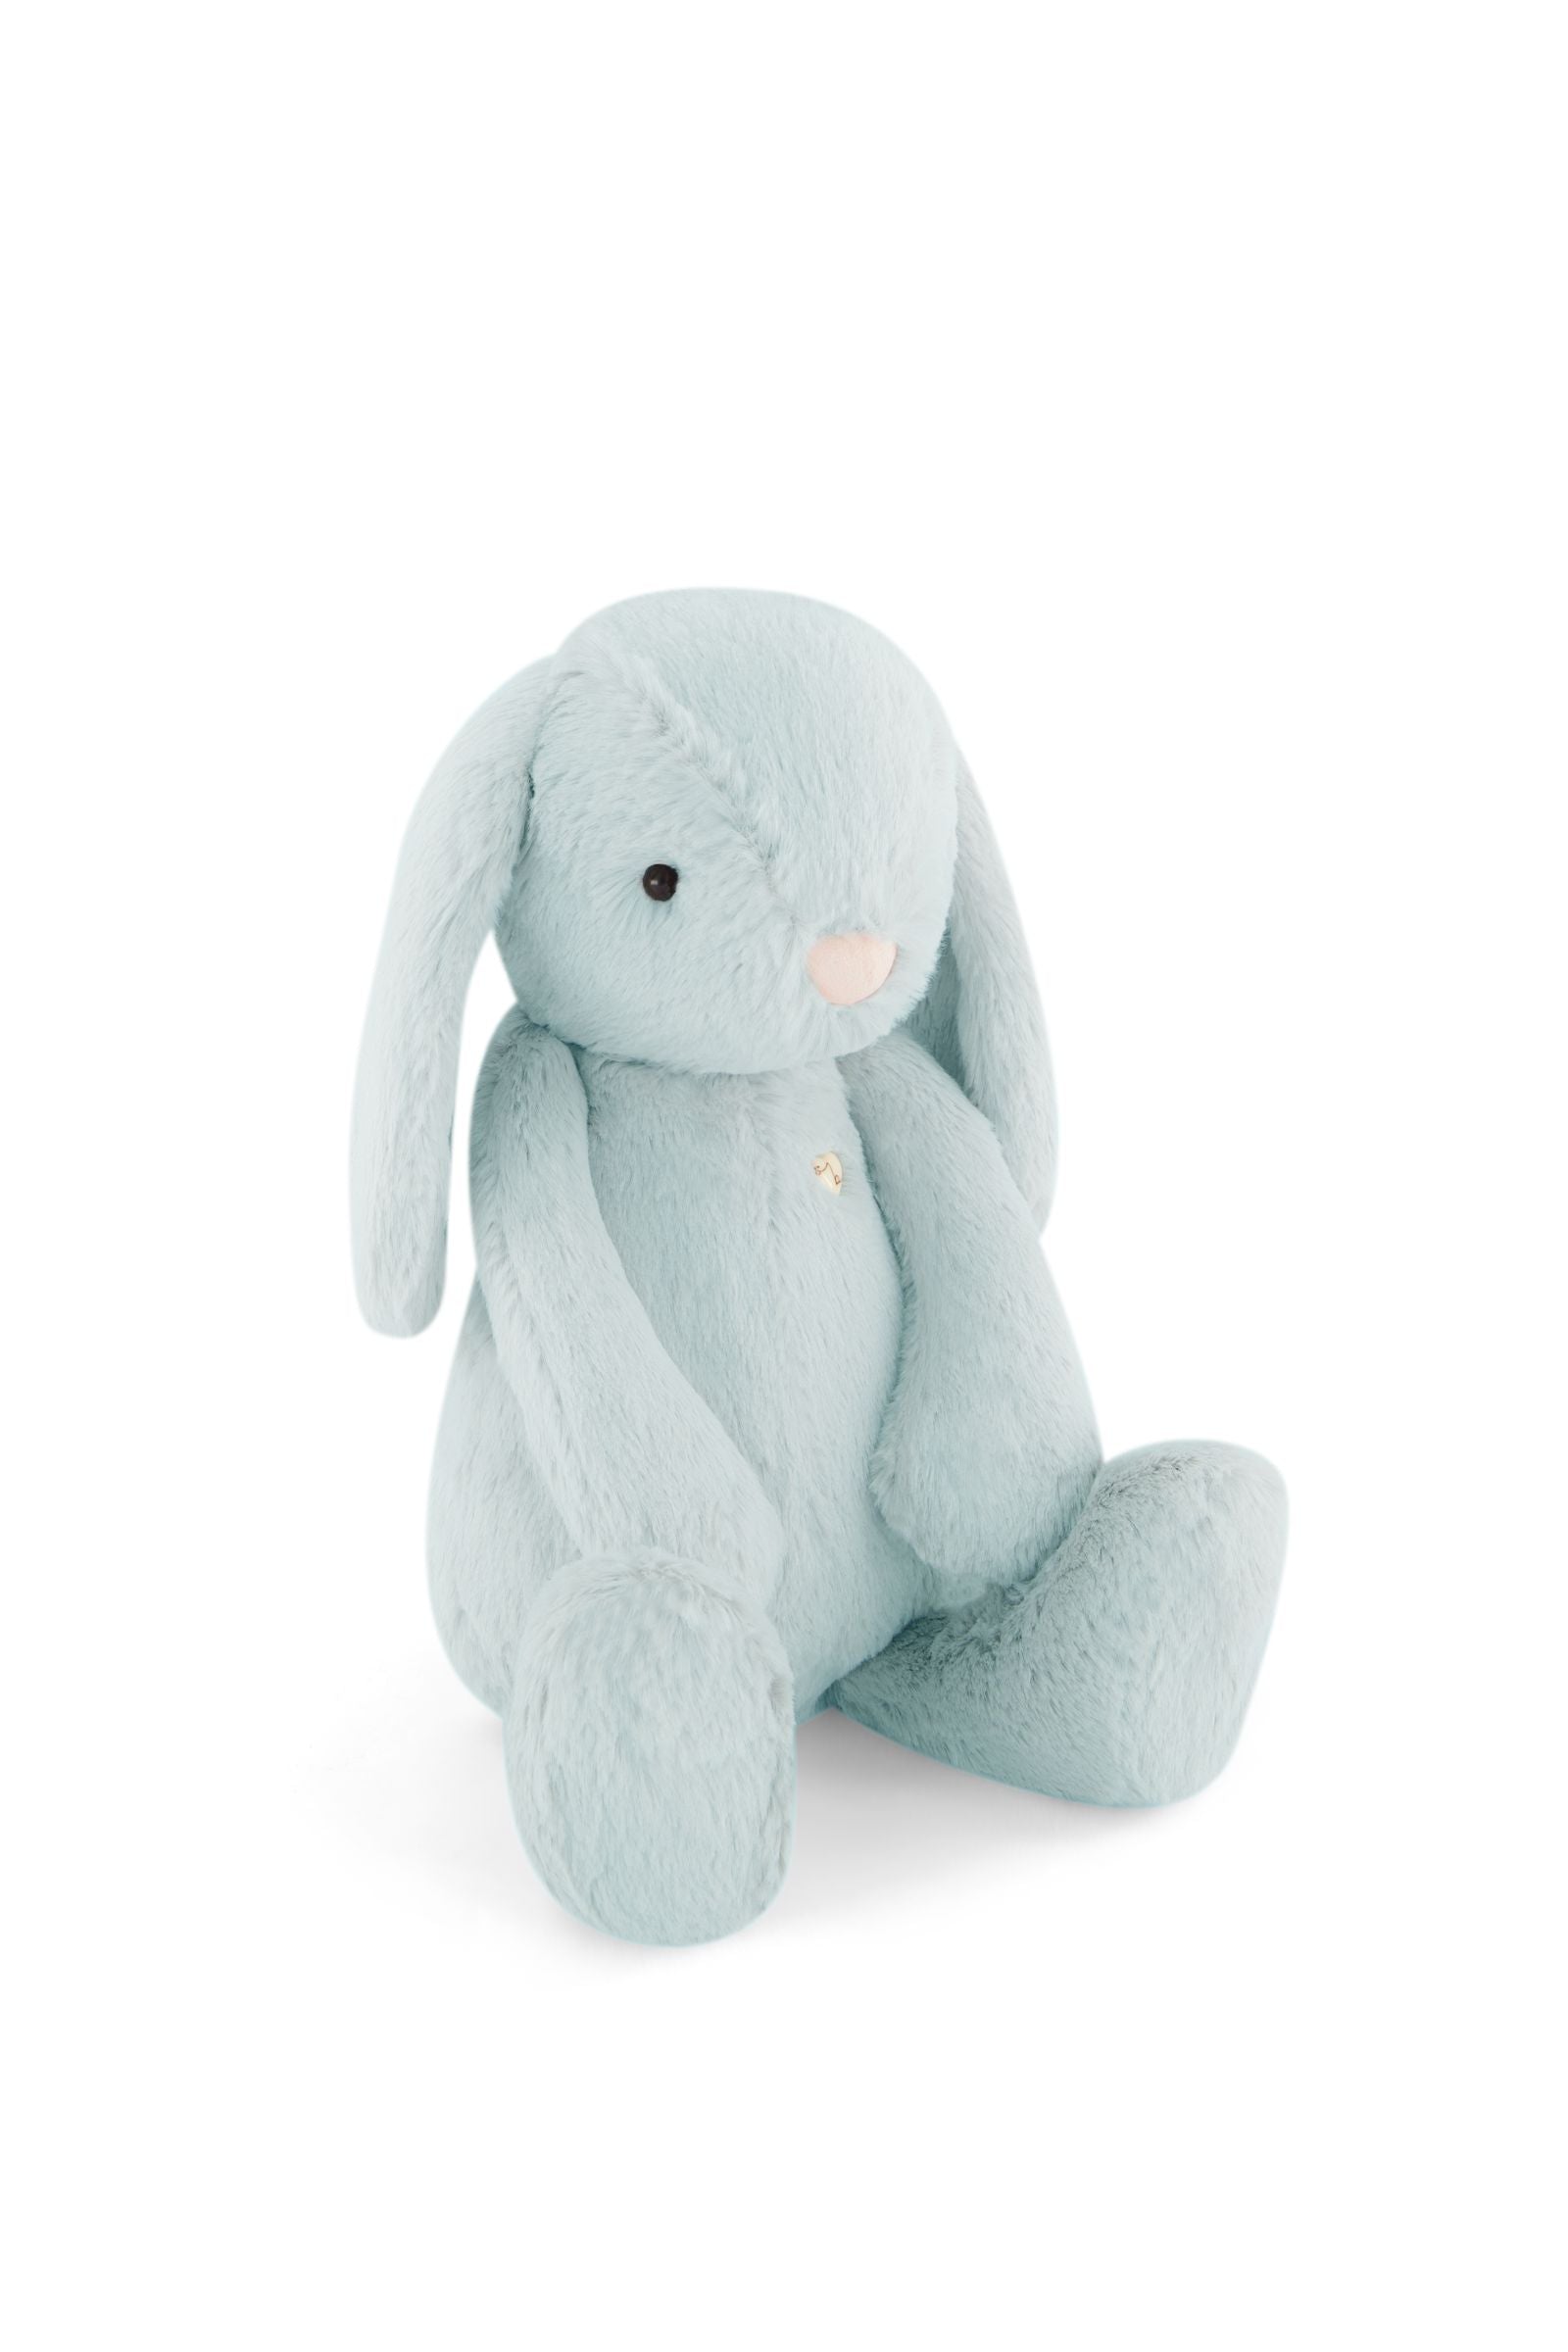 Snuggle Bunnies - Penelope the Bunny - Sprout 30cm-Toys-Jamie Kay-The Bay Room